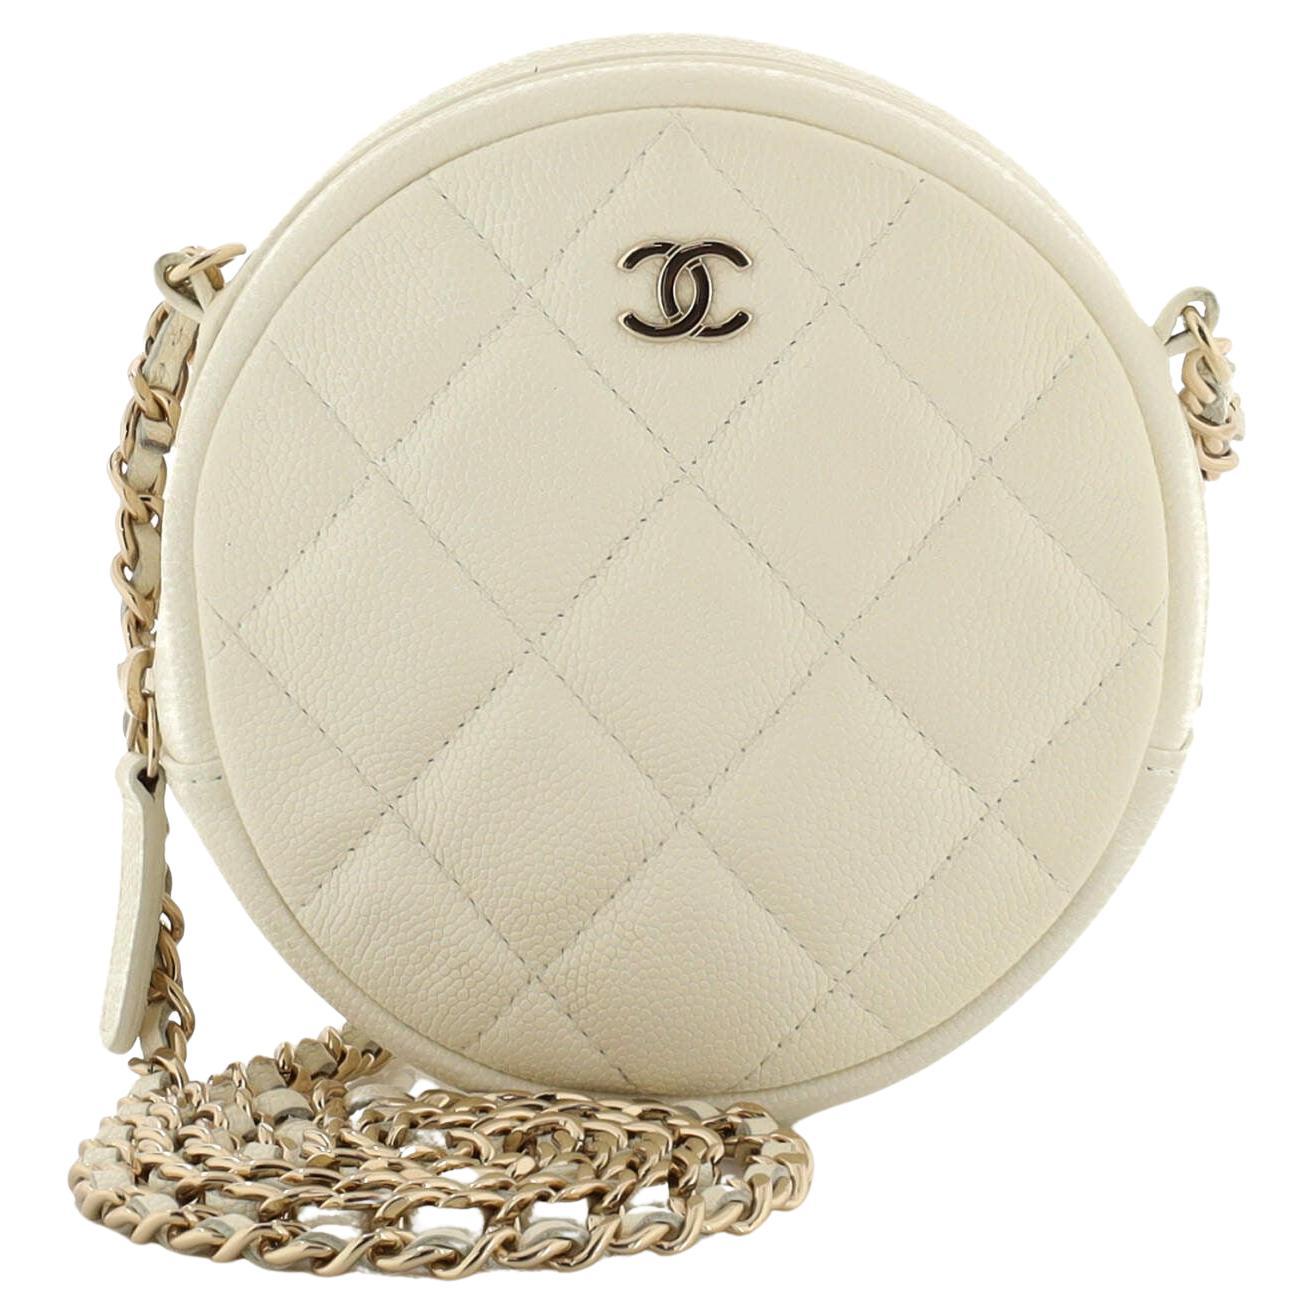 Chanel Black Quilted Caviar Round Chain Clutch Gold Tone Hardware